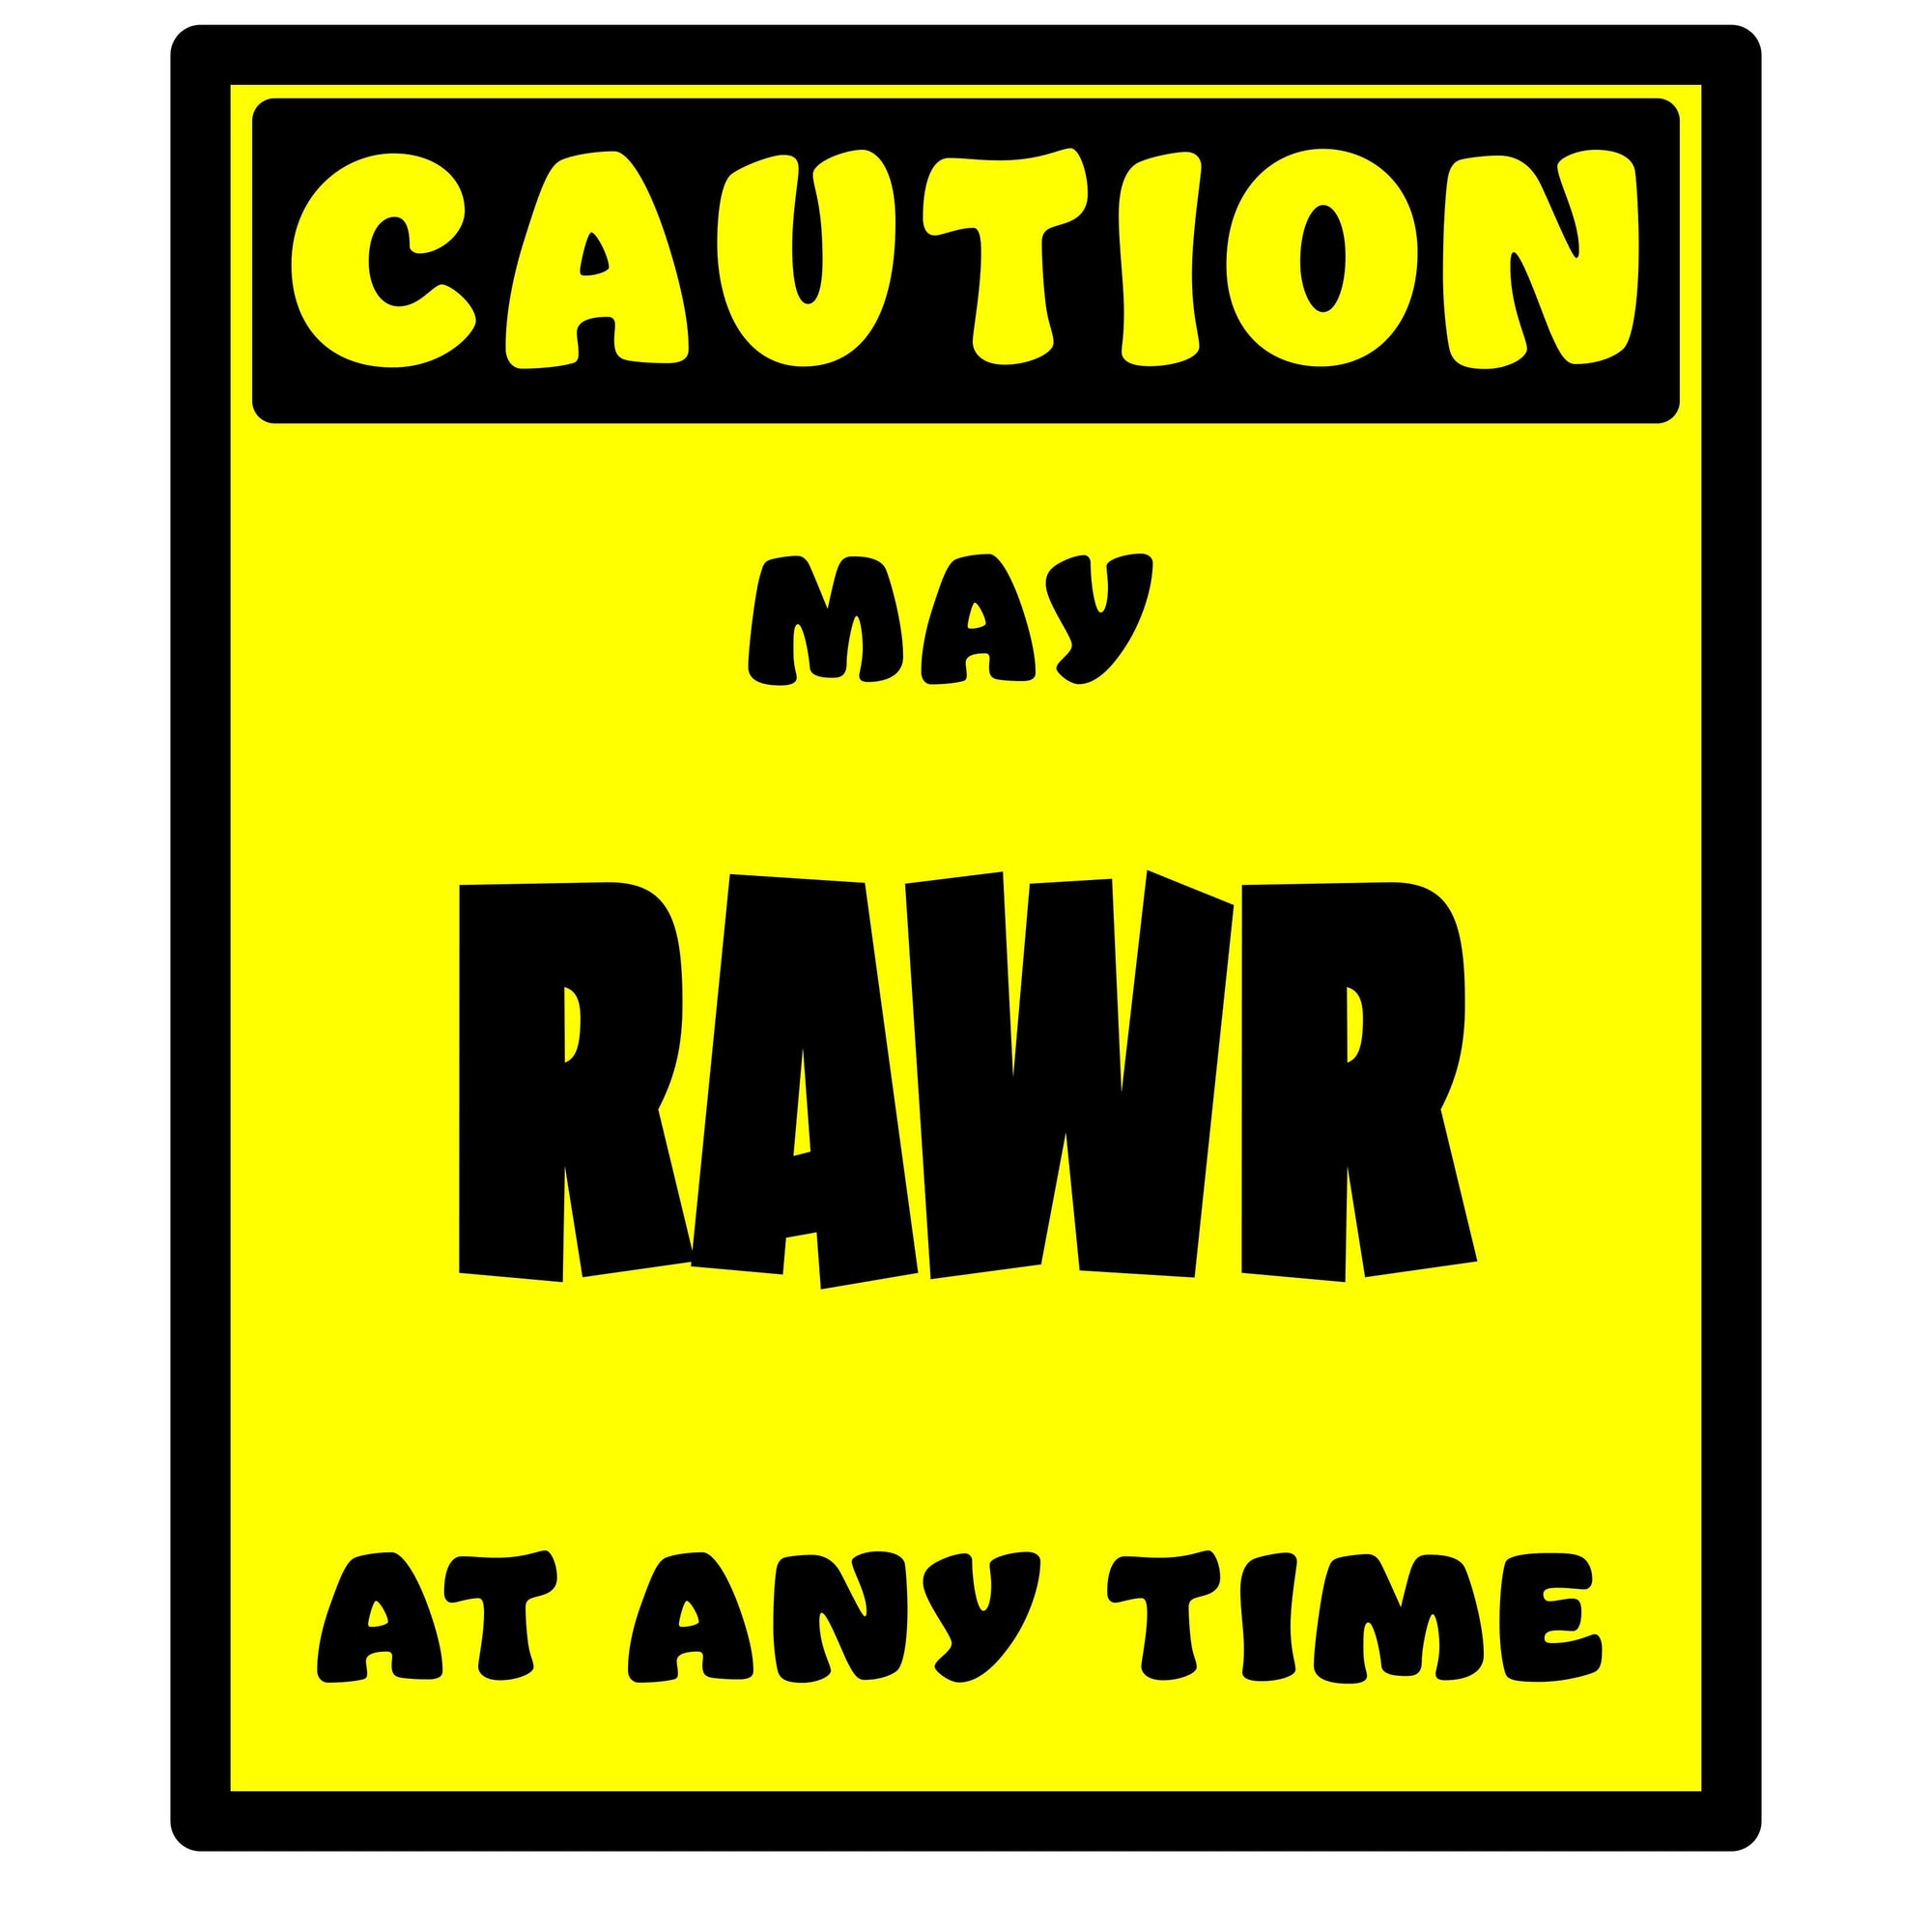 Whootorca - Caution! Series - CAUTION! May RAWR at any time!